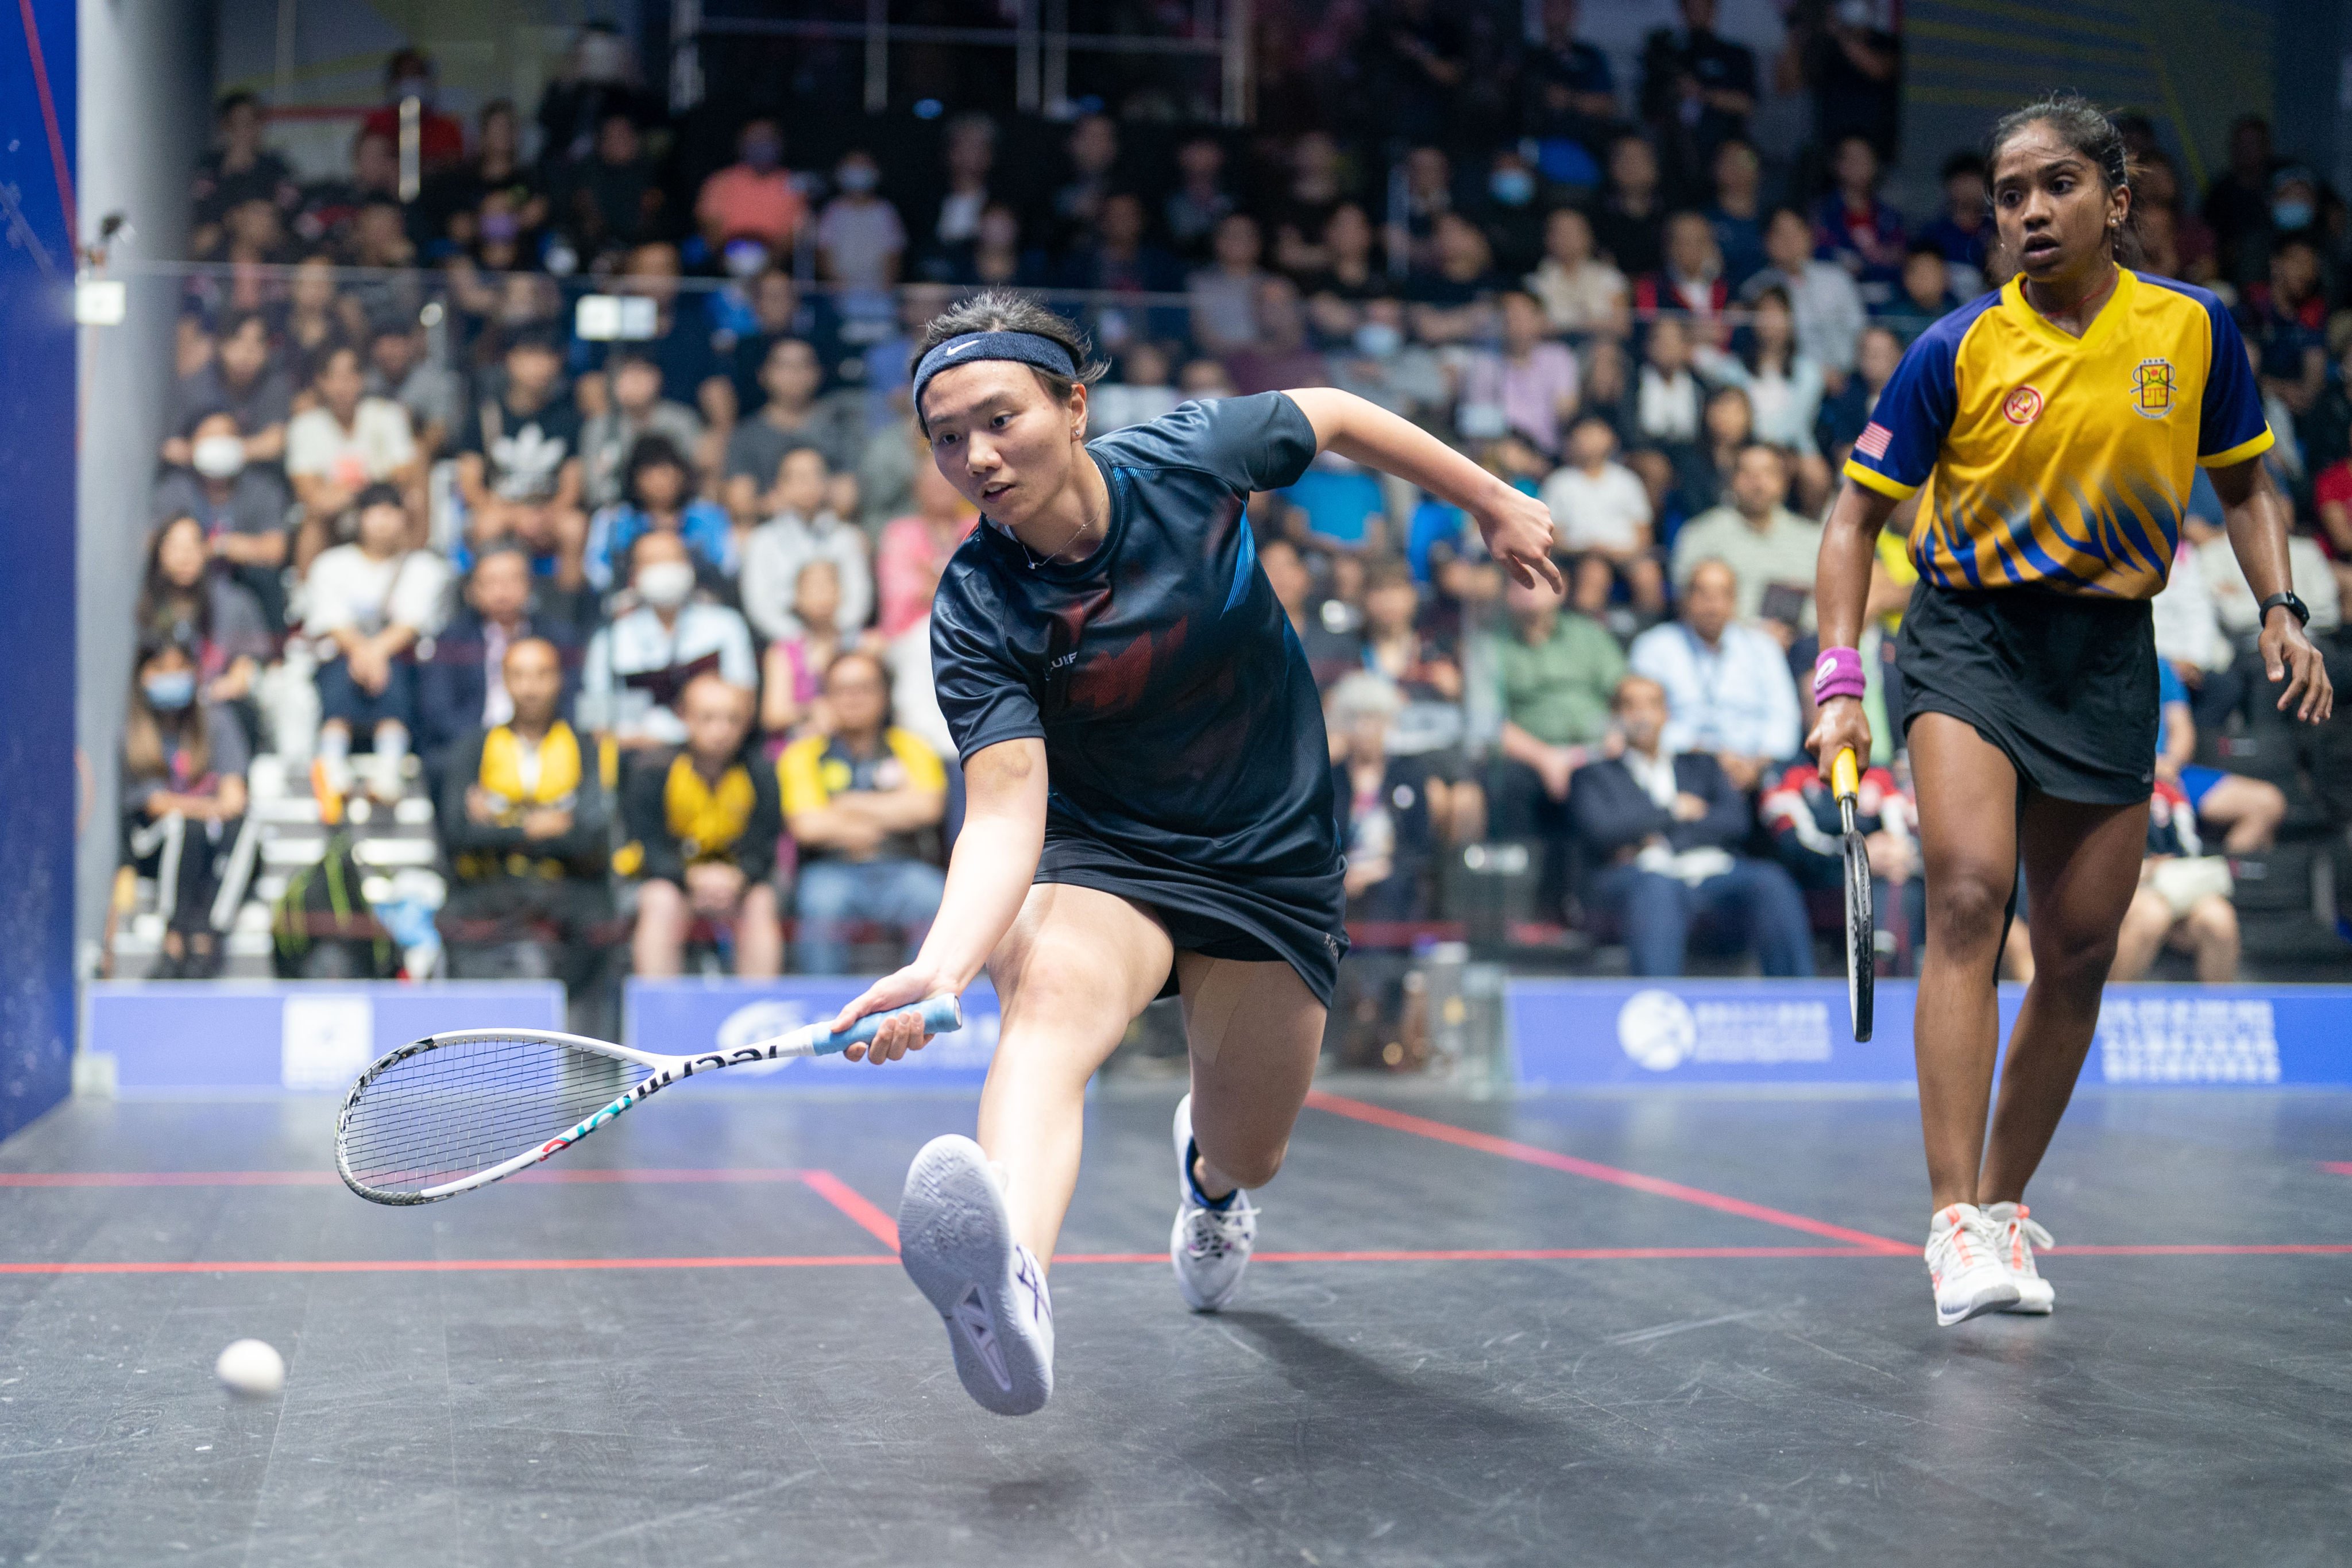 Simmi Chan won the Asian Championships title in front of her home crowd at the Hong Kong Squash Centre in Central. Photo: Hong Kong Squash 